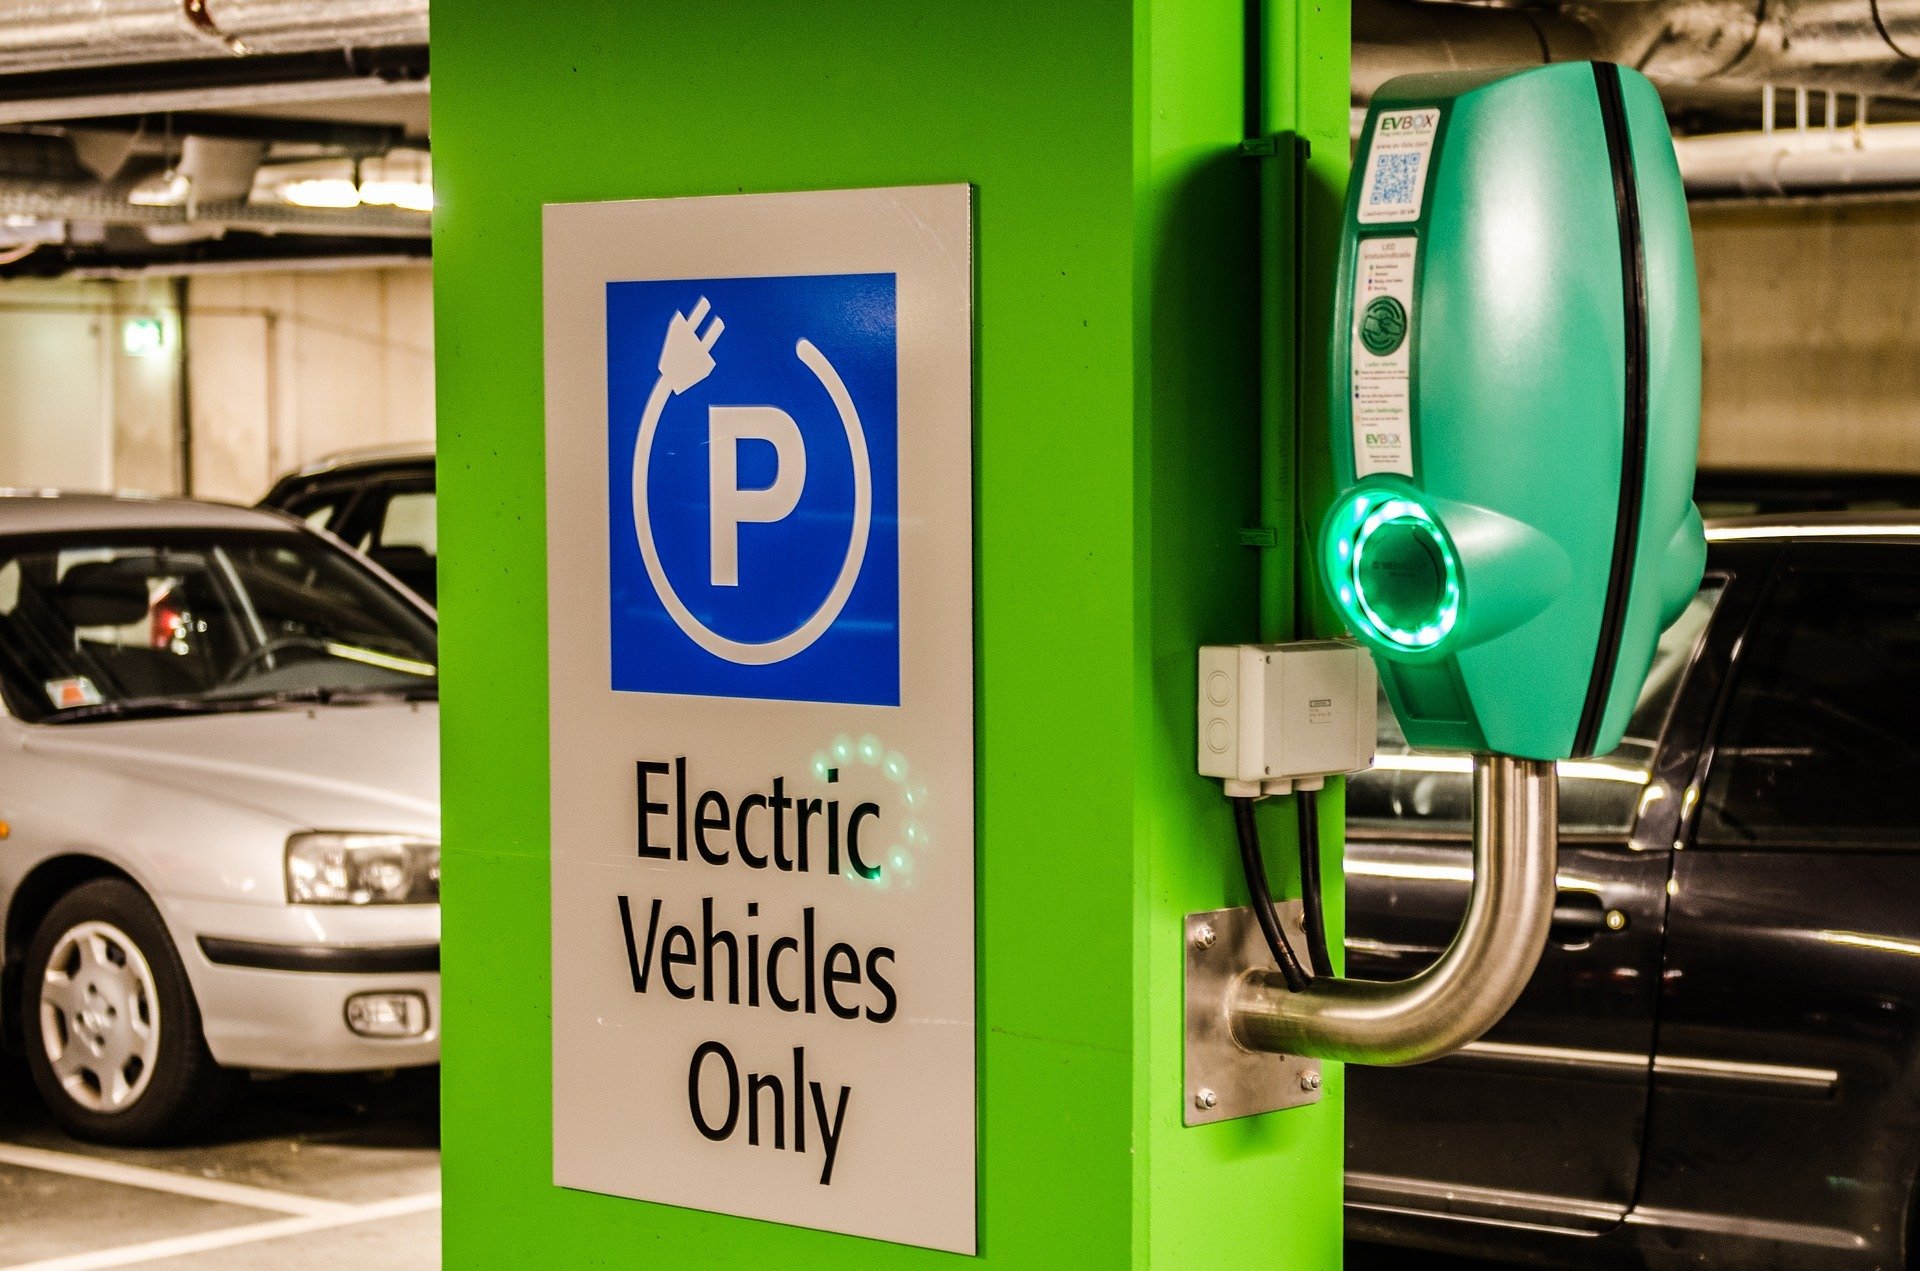 Would you buy a electric car or truck?